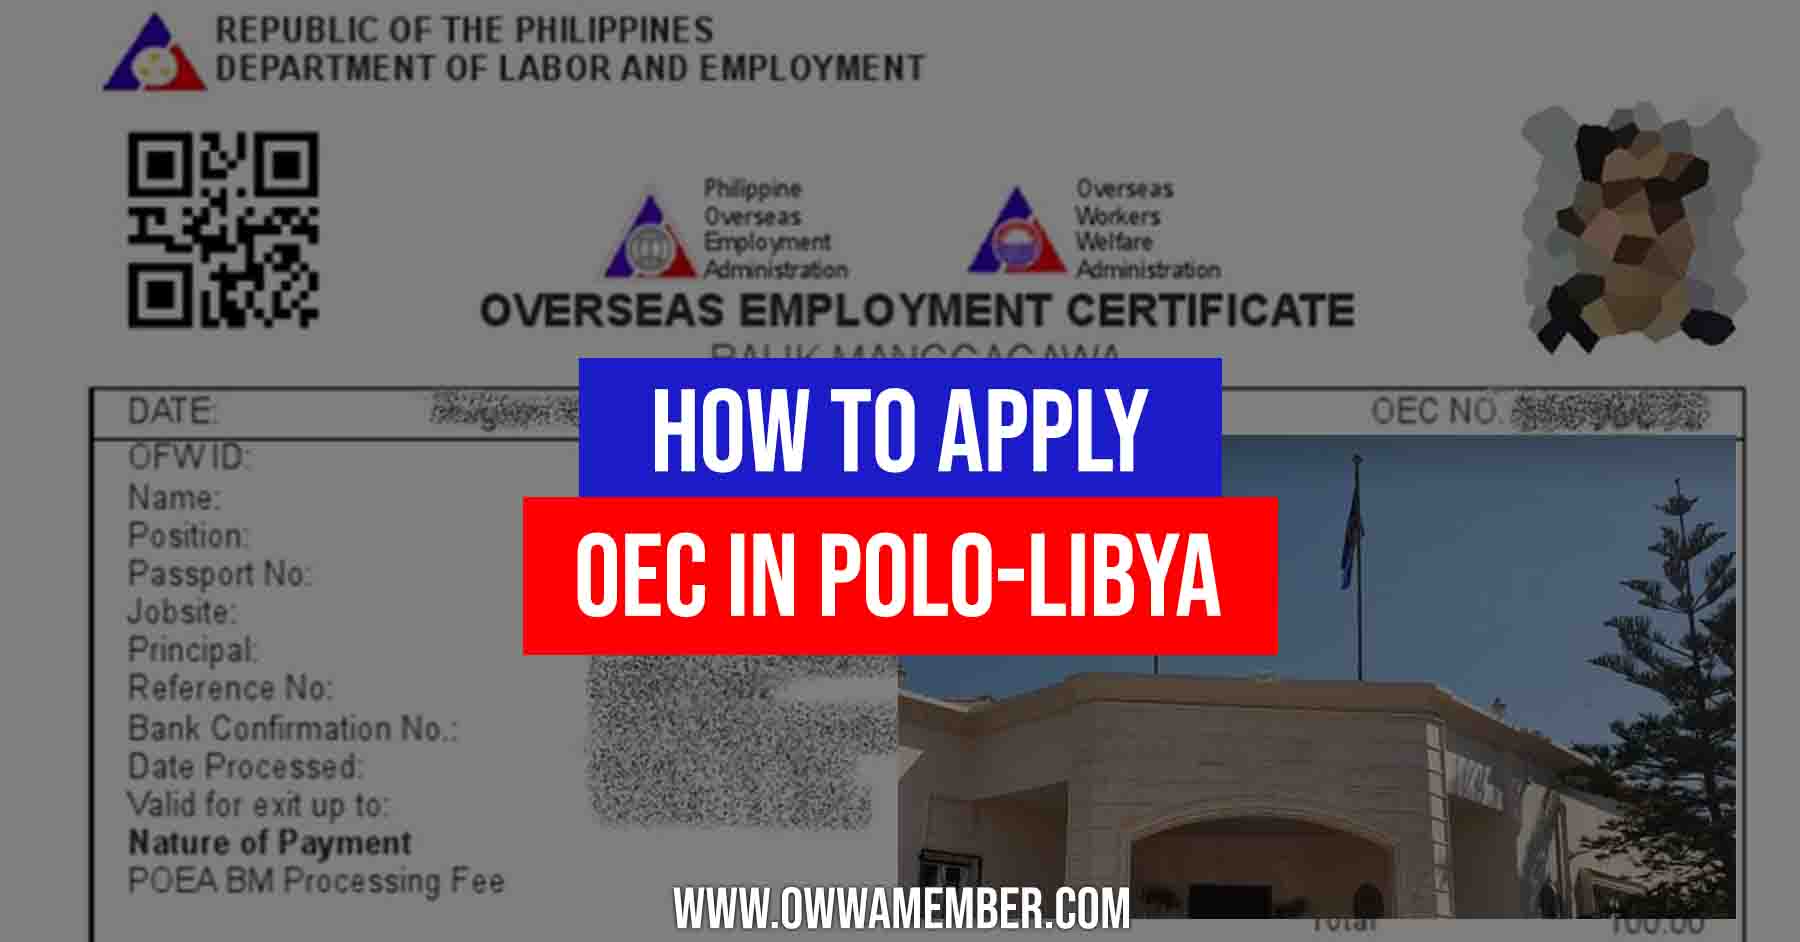 how to apply for oec in polo tripoli libya